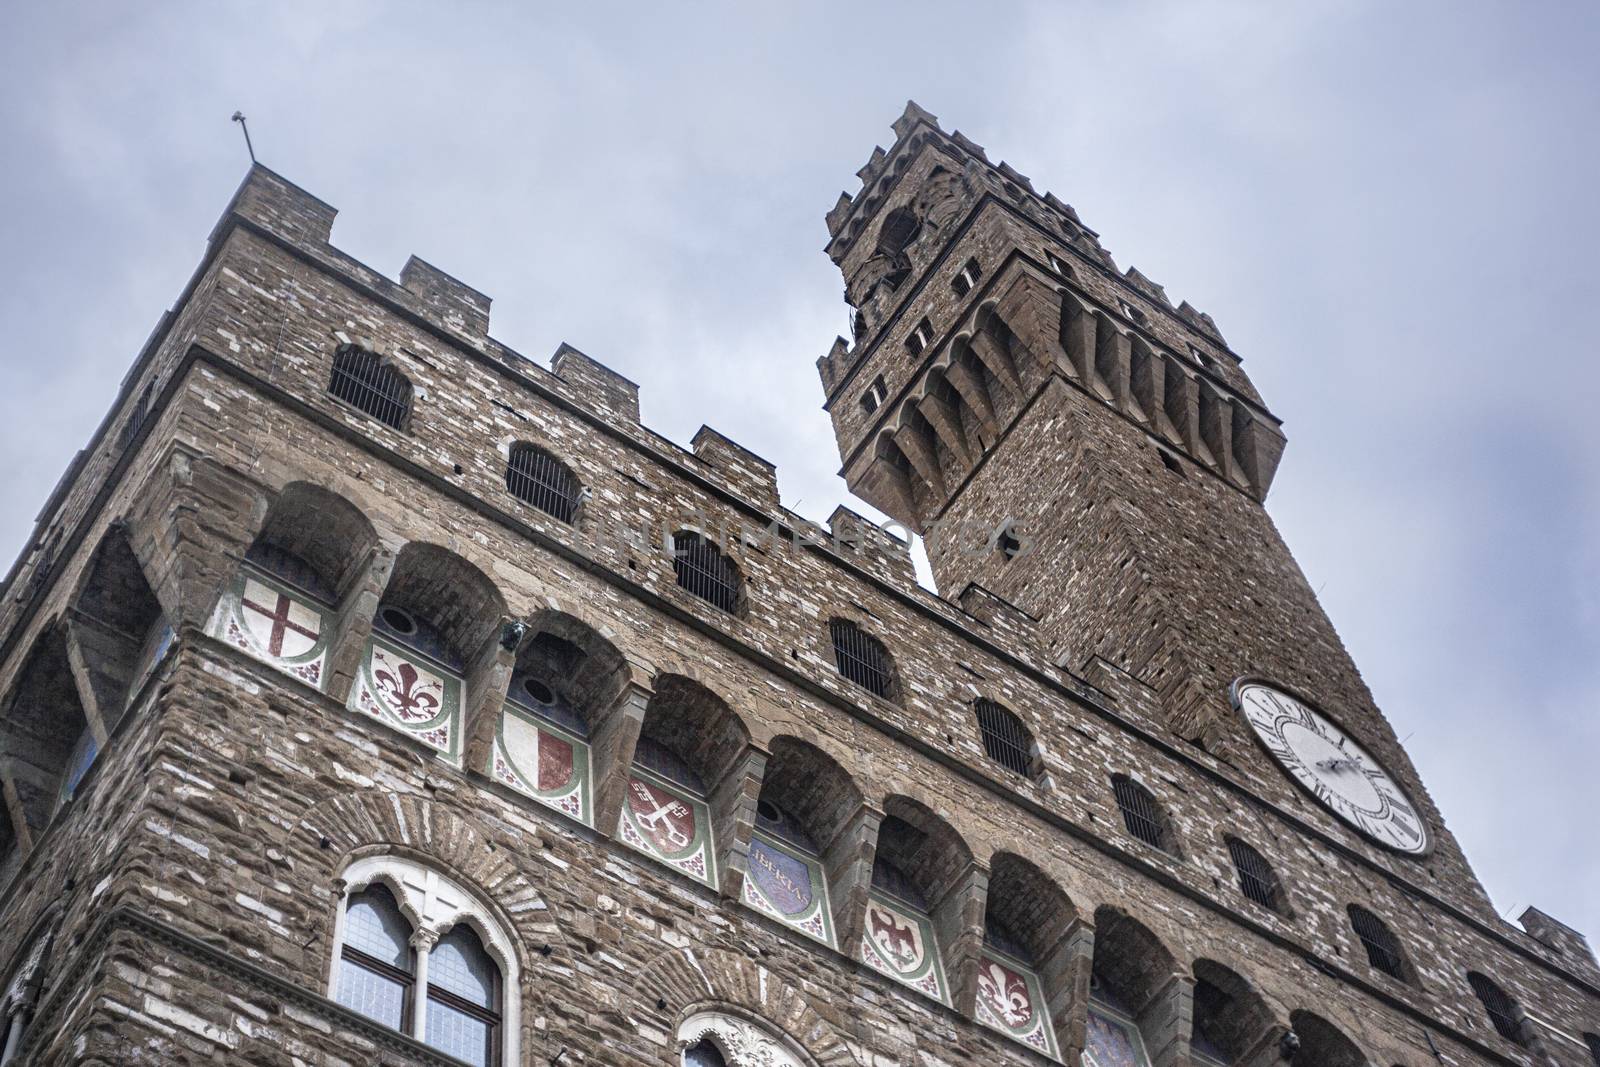 Palazzo Vecchio in Florence 3 by pippocarlot